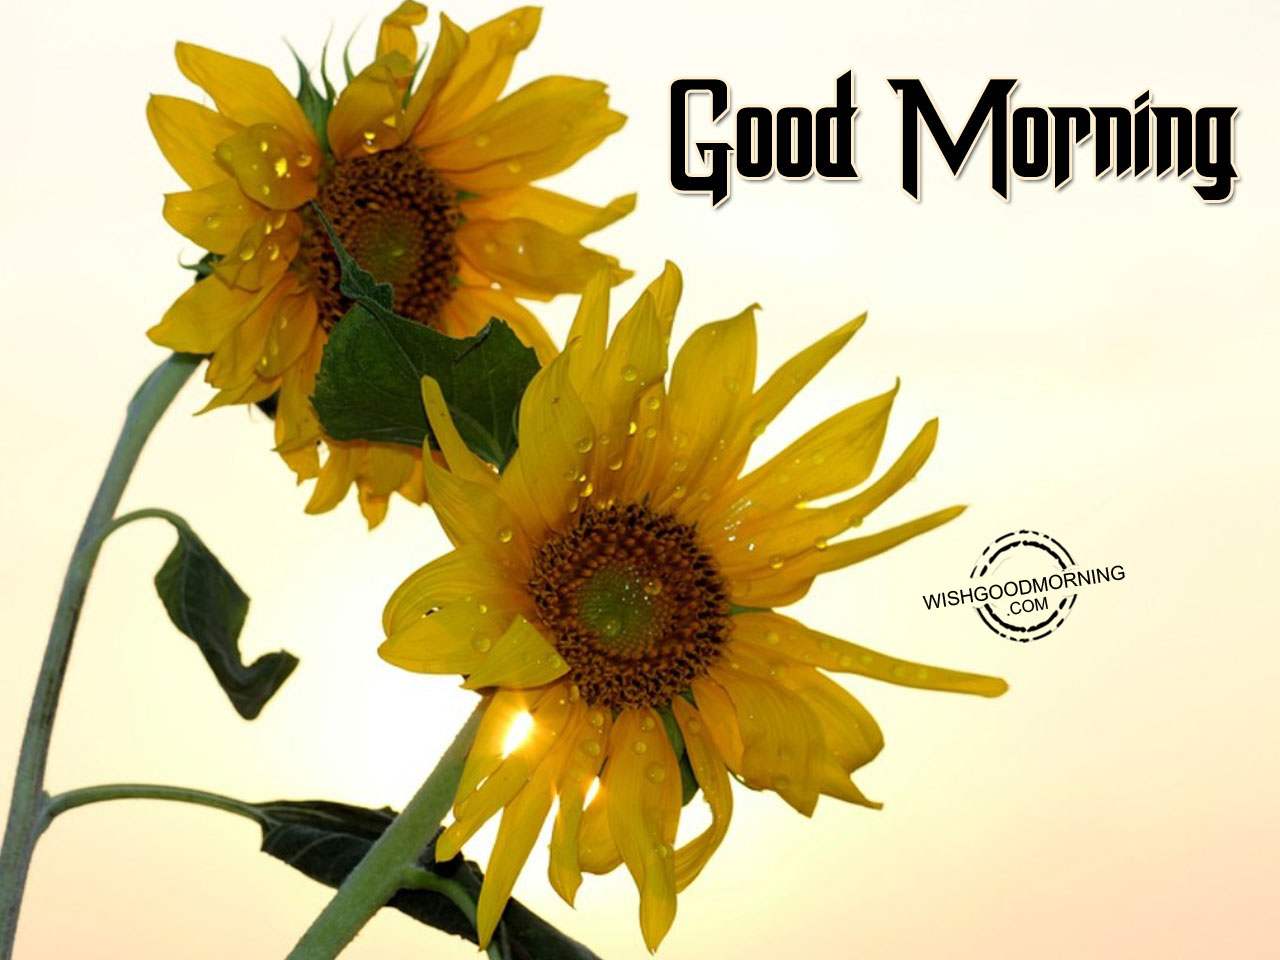 Good Morning Wishes - Good Morning Pictures – WishGoodMorning.com